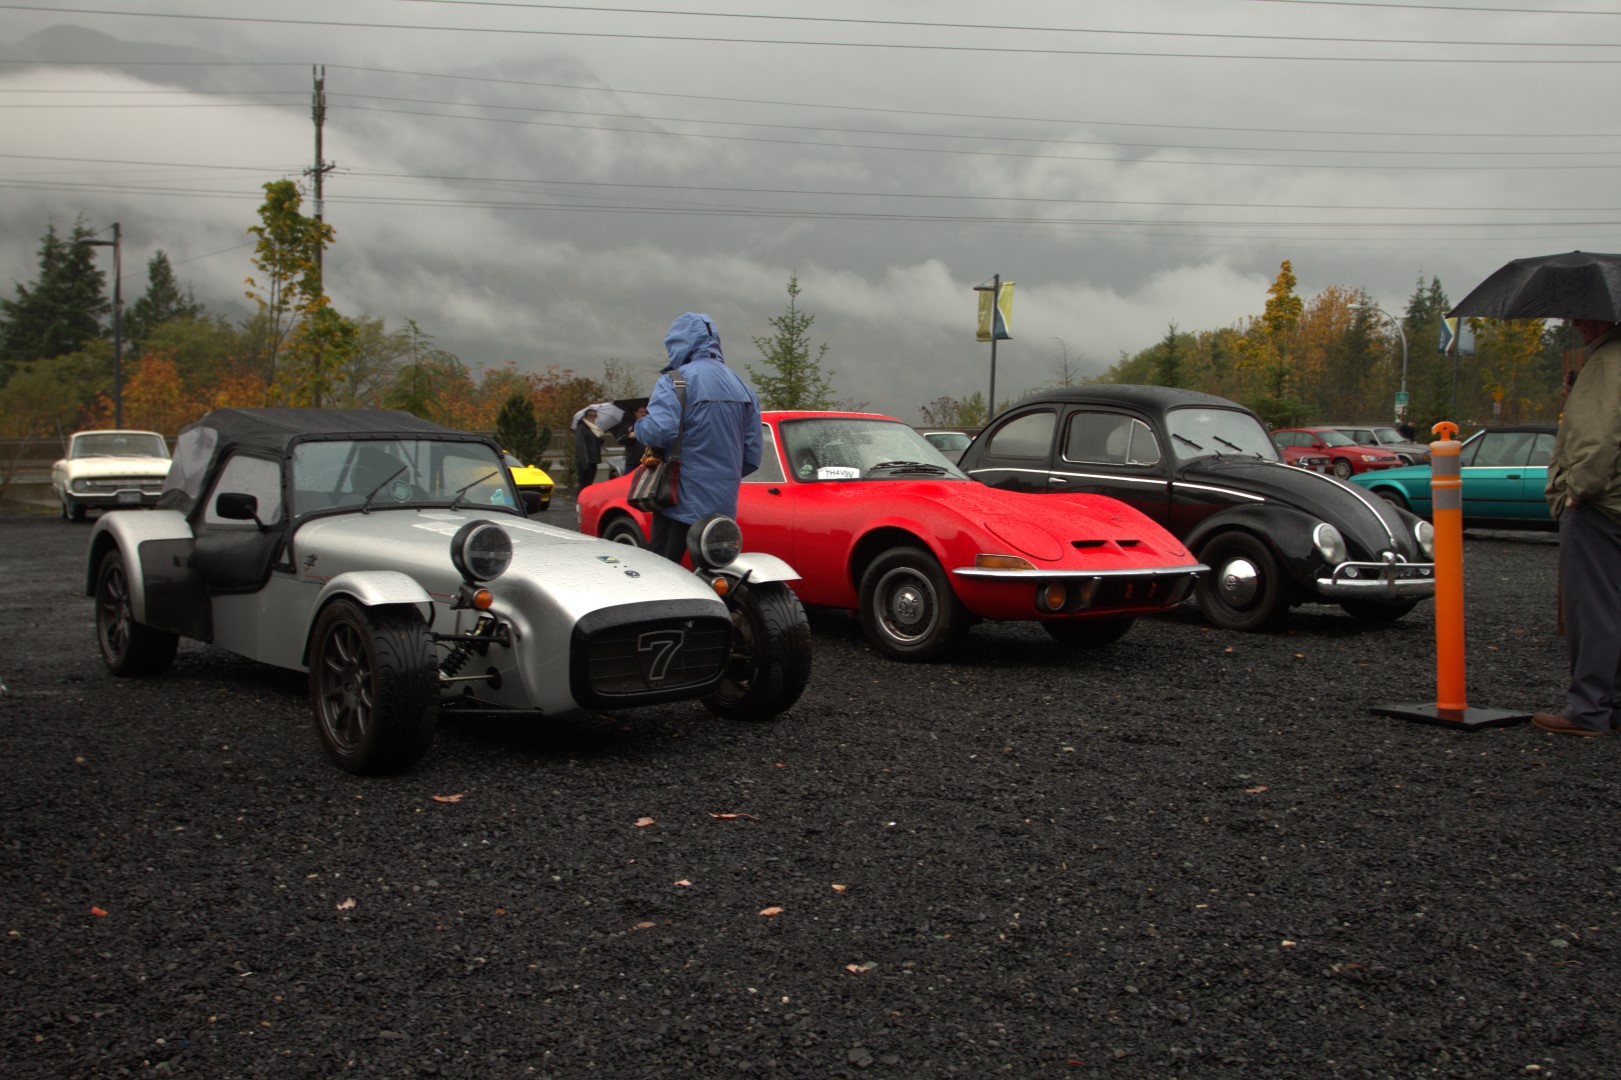 L to R, Super 7, Opel GT and a very nice early bug belonging to the event organizer.